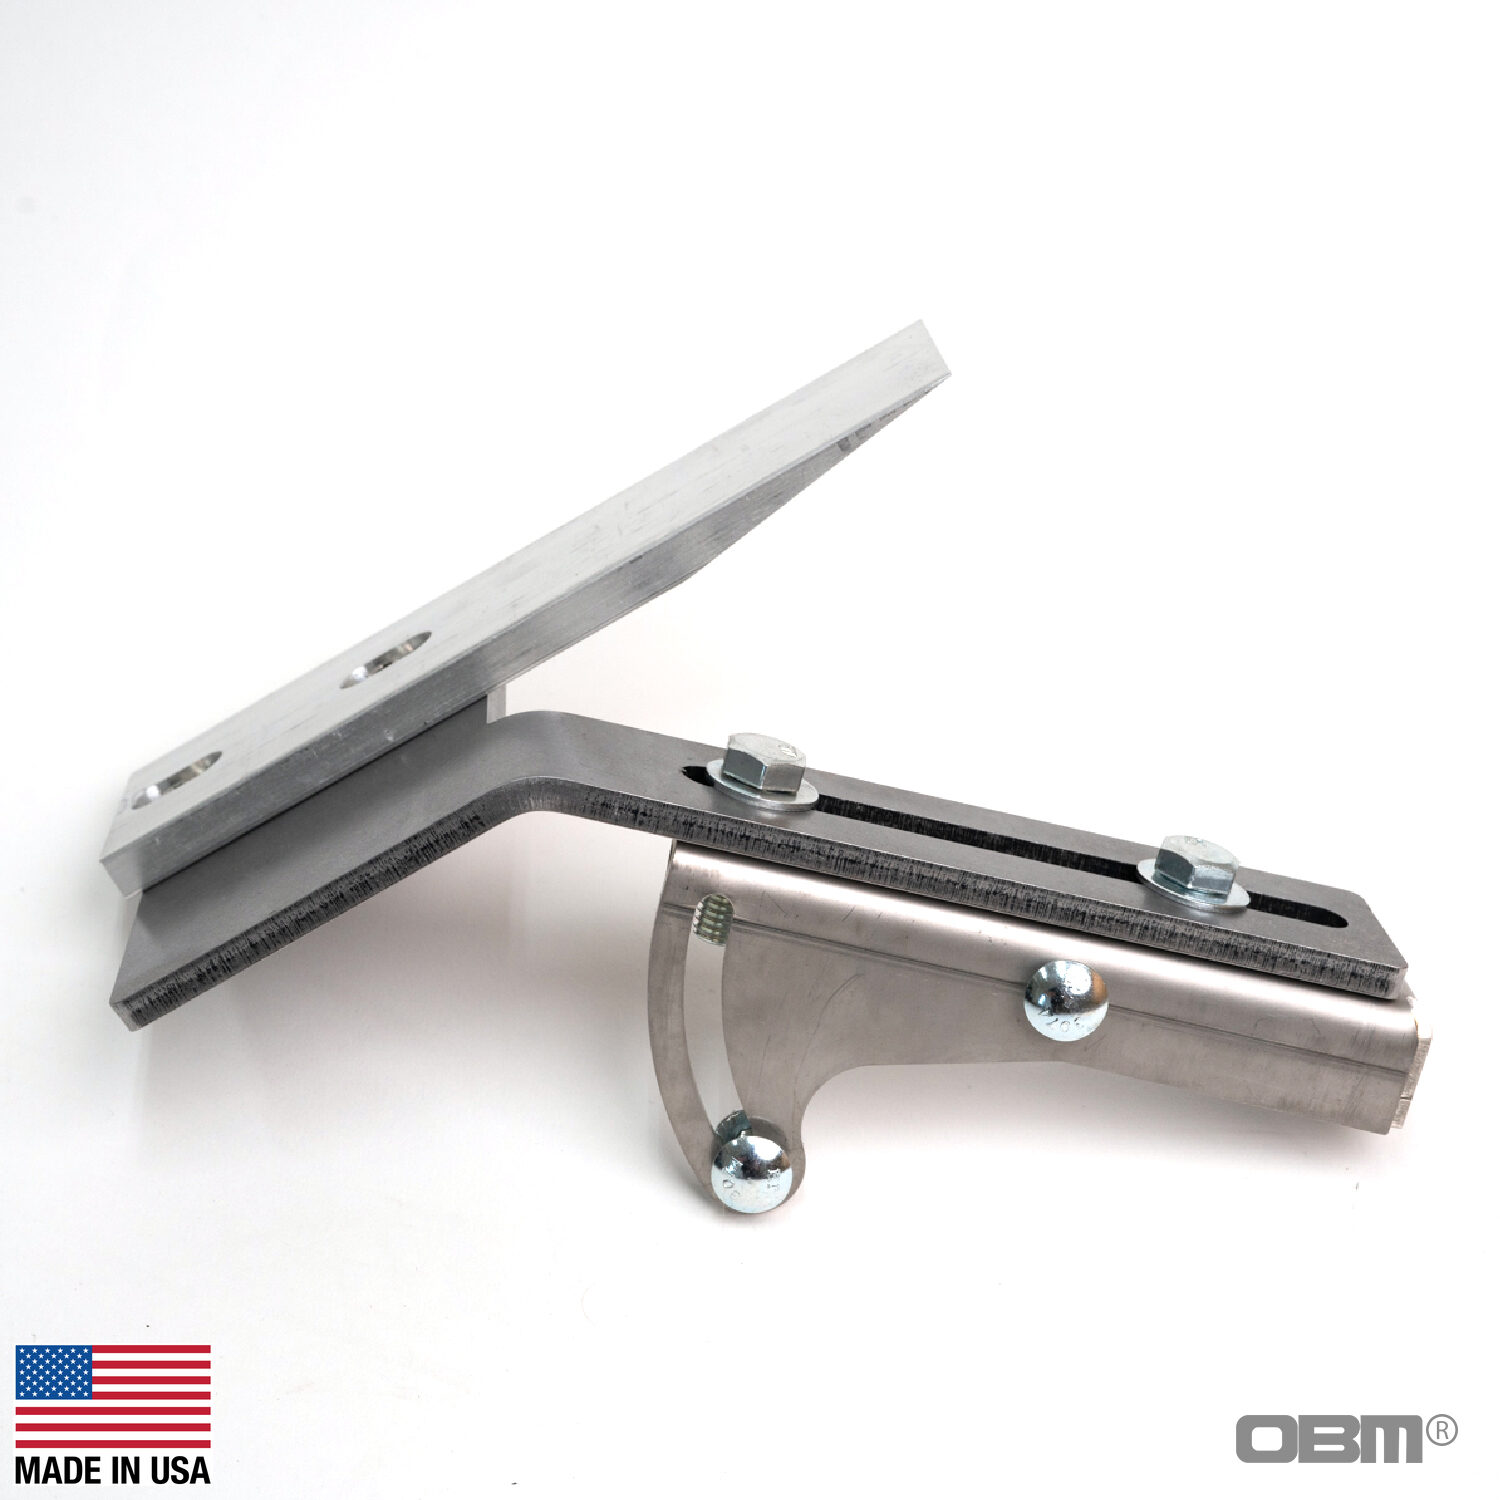 Knife Sharpening Angle Guide Attachment for 1 in. Belt Sanders